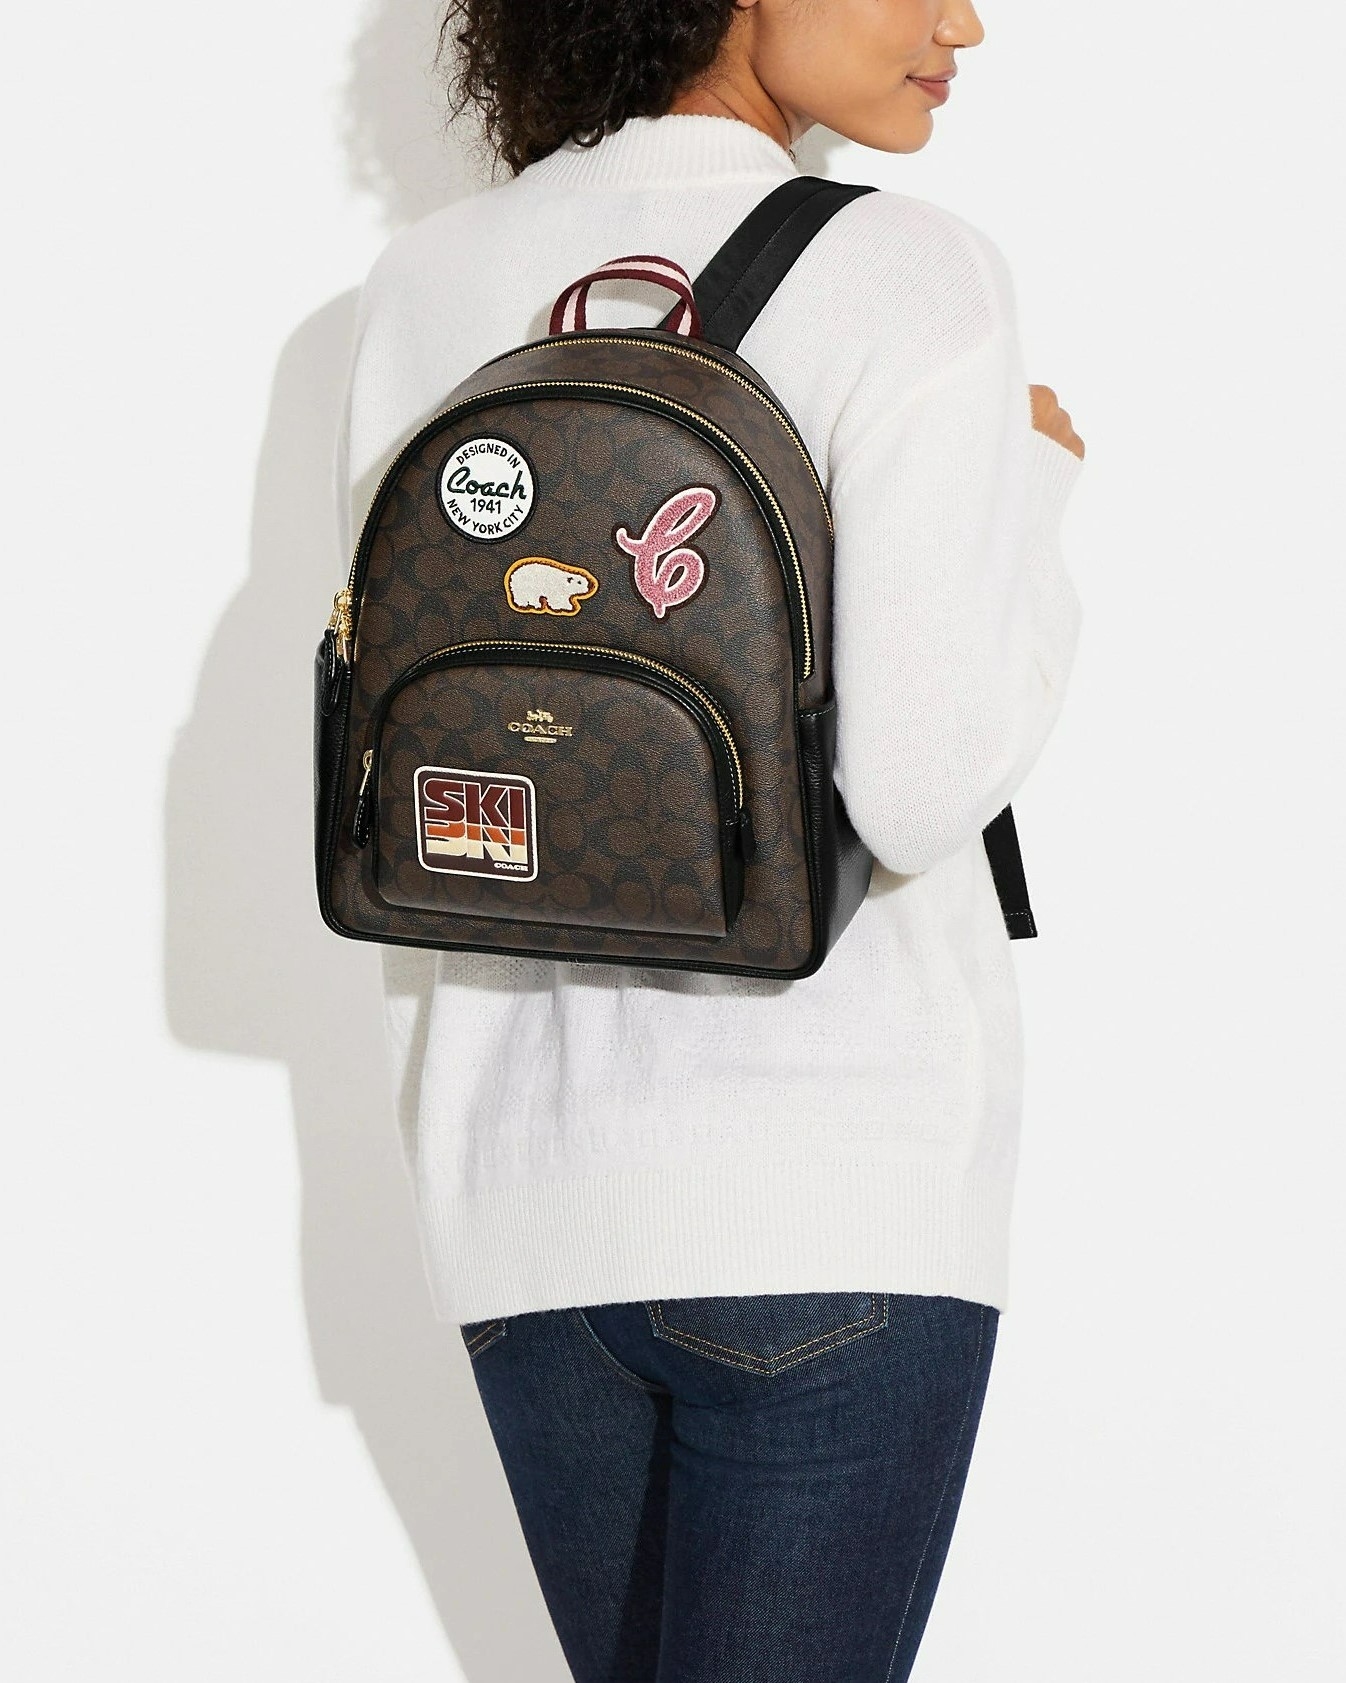 BALO NỮ COACH 1941 COURT BACKPACK IN SIGNATURE CANVAS WITH SKI PATCHES 3